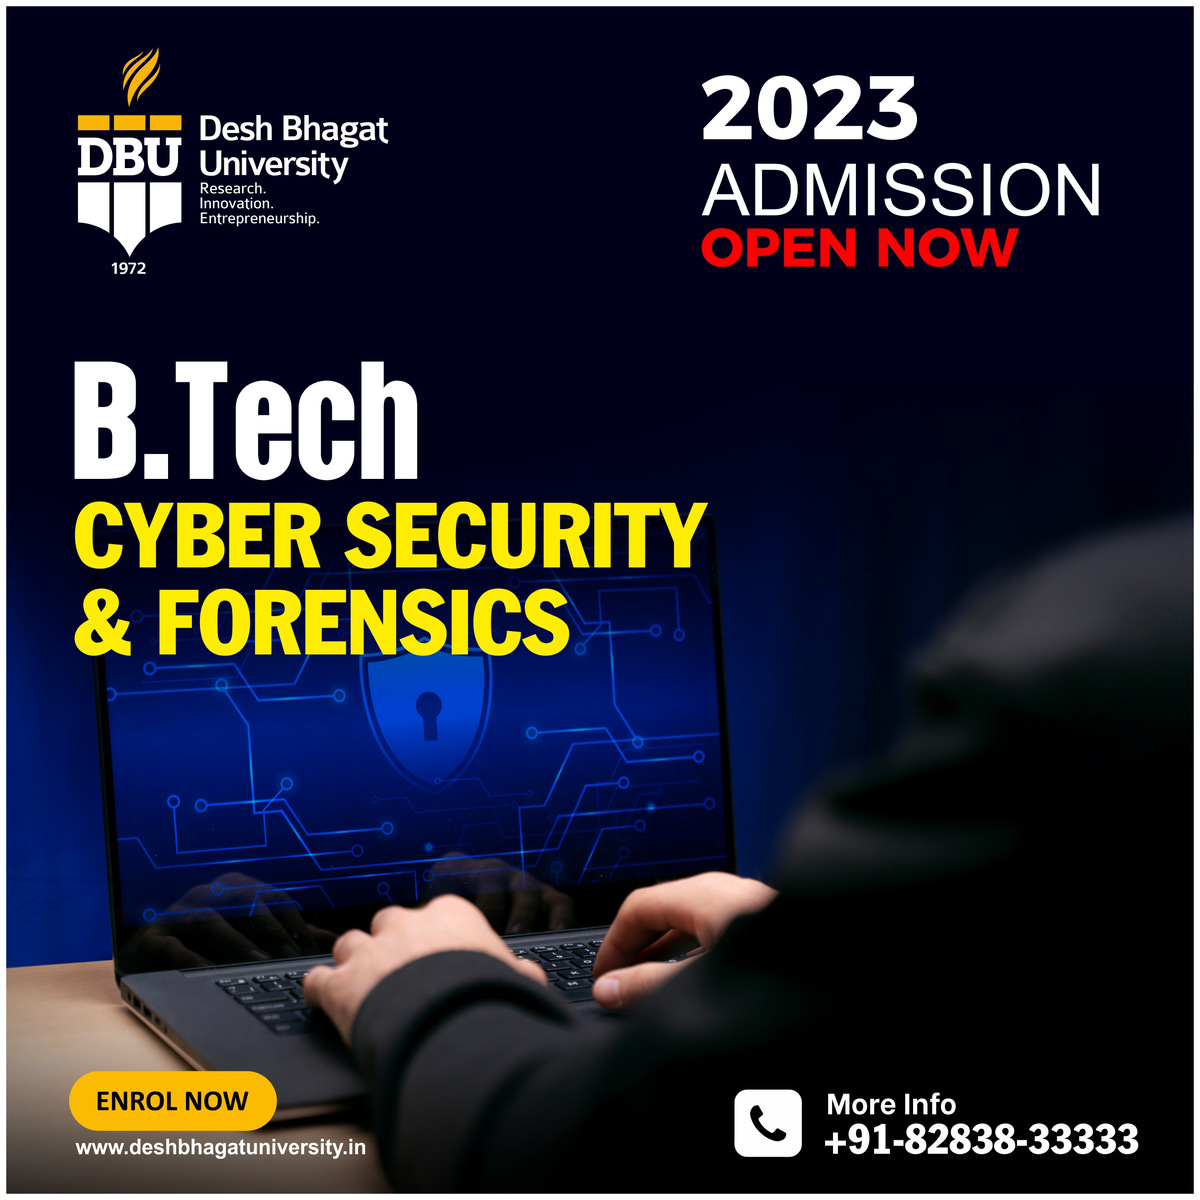 Faculty of B. Tech CYBER SECURITY & FORENSICS